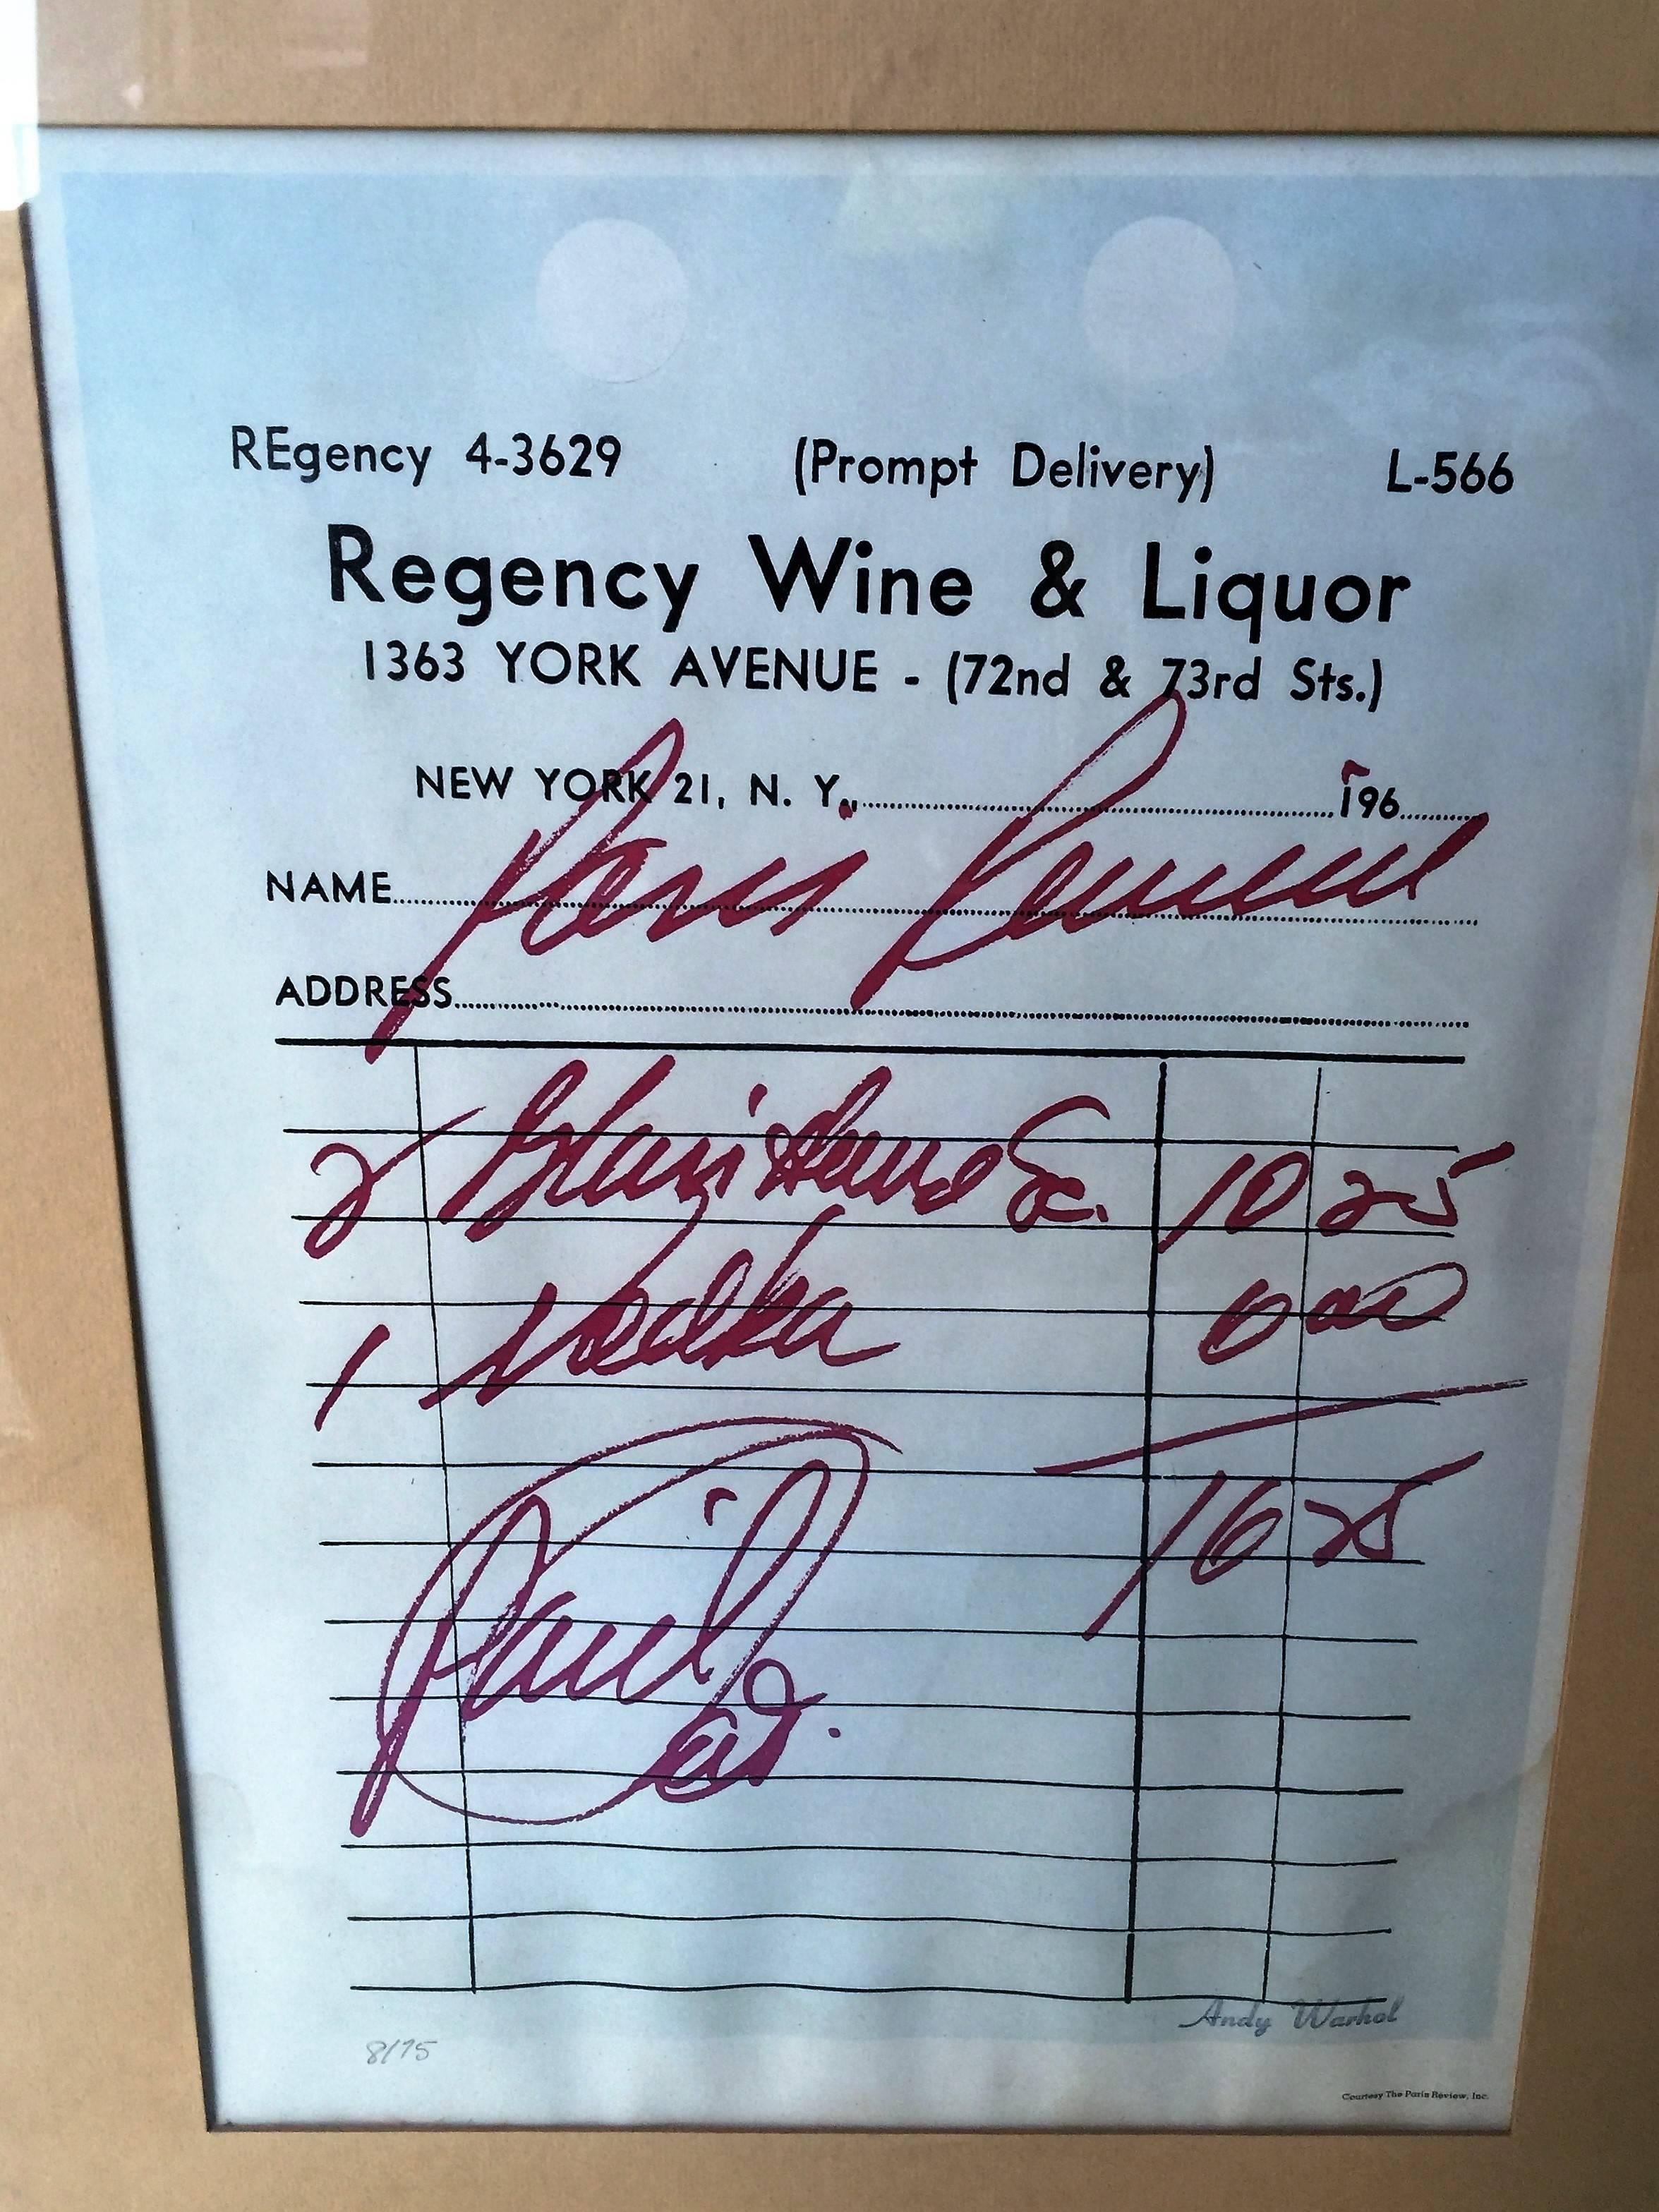 Paris Review liquor receipt circa 1967 with Andy Warhol stamped signature in lower right corner and numbered in pencil 8/75 printed on wove paper. Die cut holes on top, in matted chrome frame also stamped: Courtesy The Paris Review Inc.